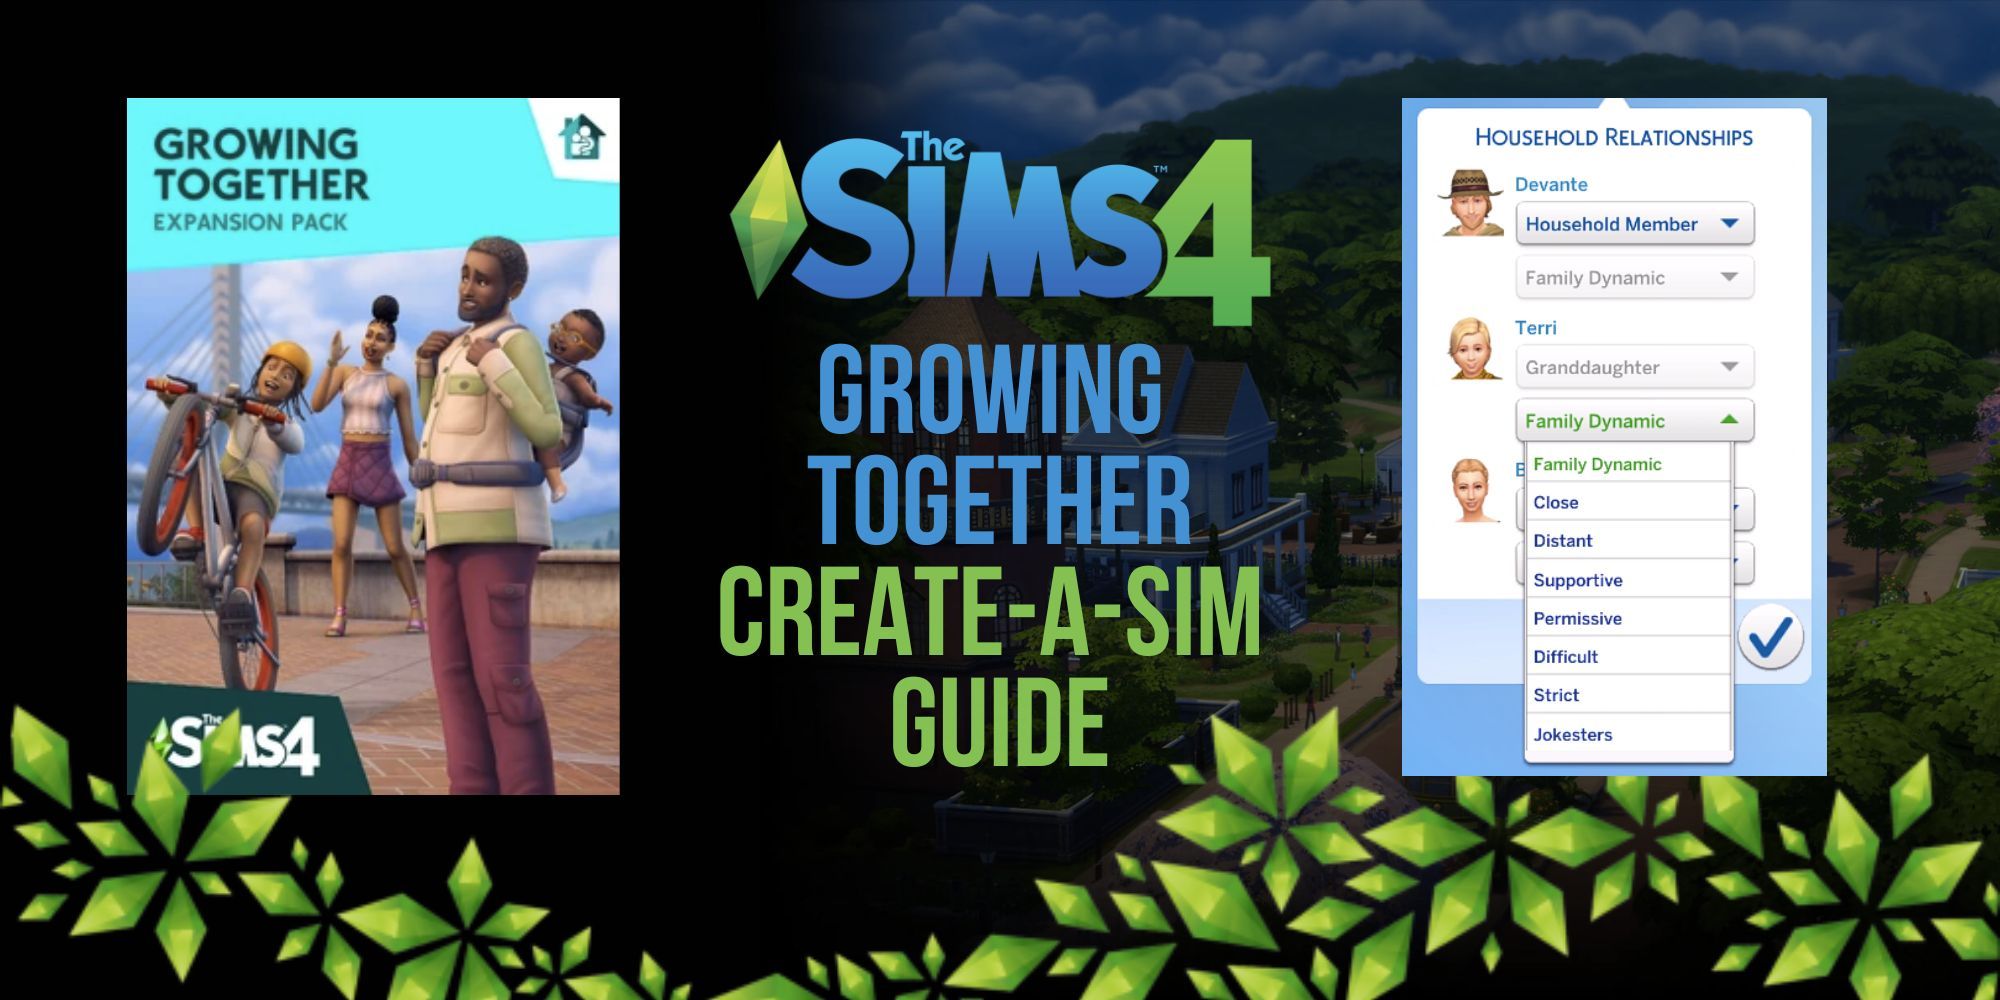 The Sims 4 Growing Together CAS Guide